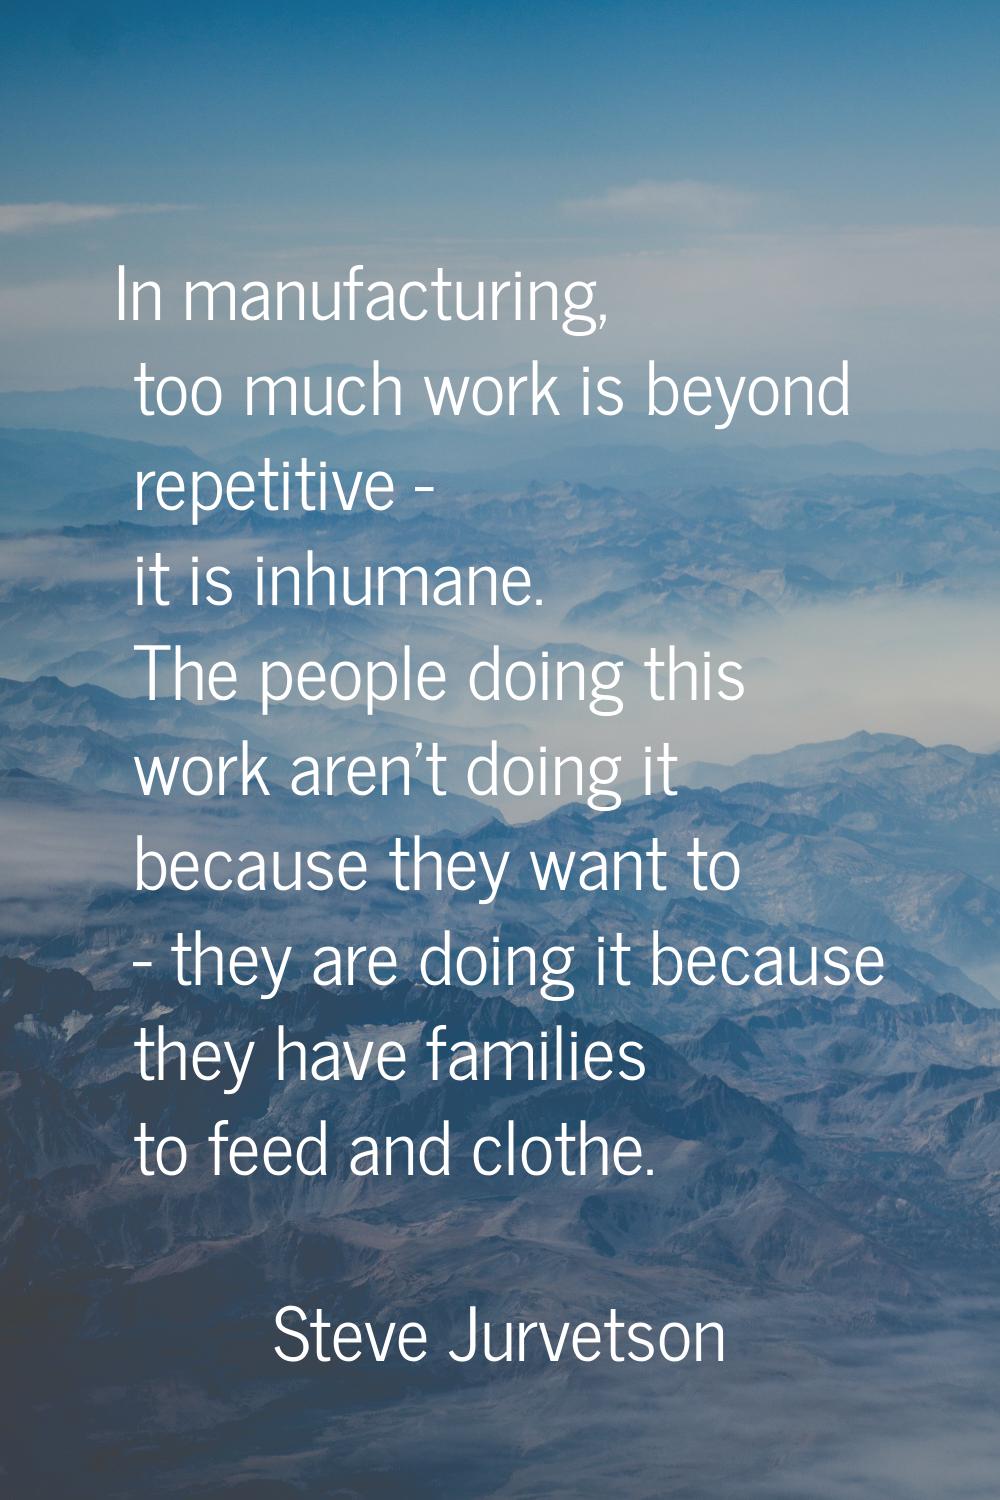 In manufacturing, too much work is beyond repetitive - it is inhumane. The people doing this work a